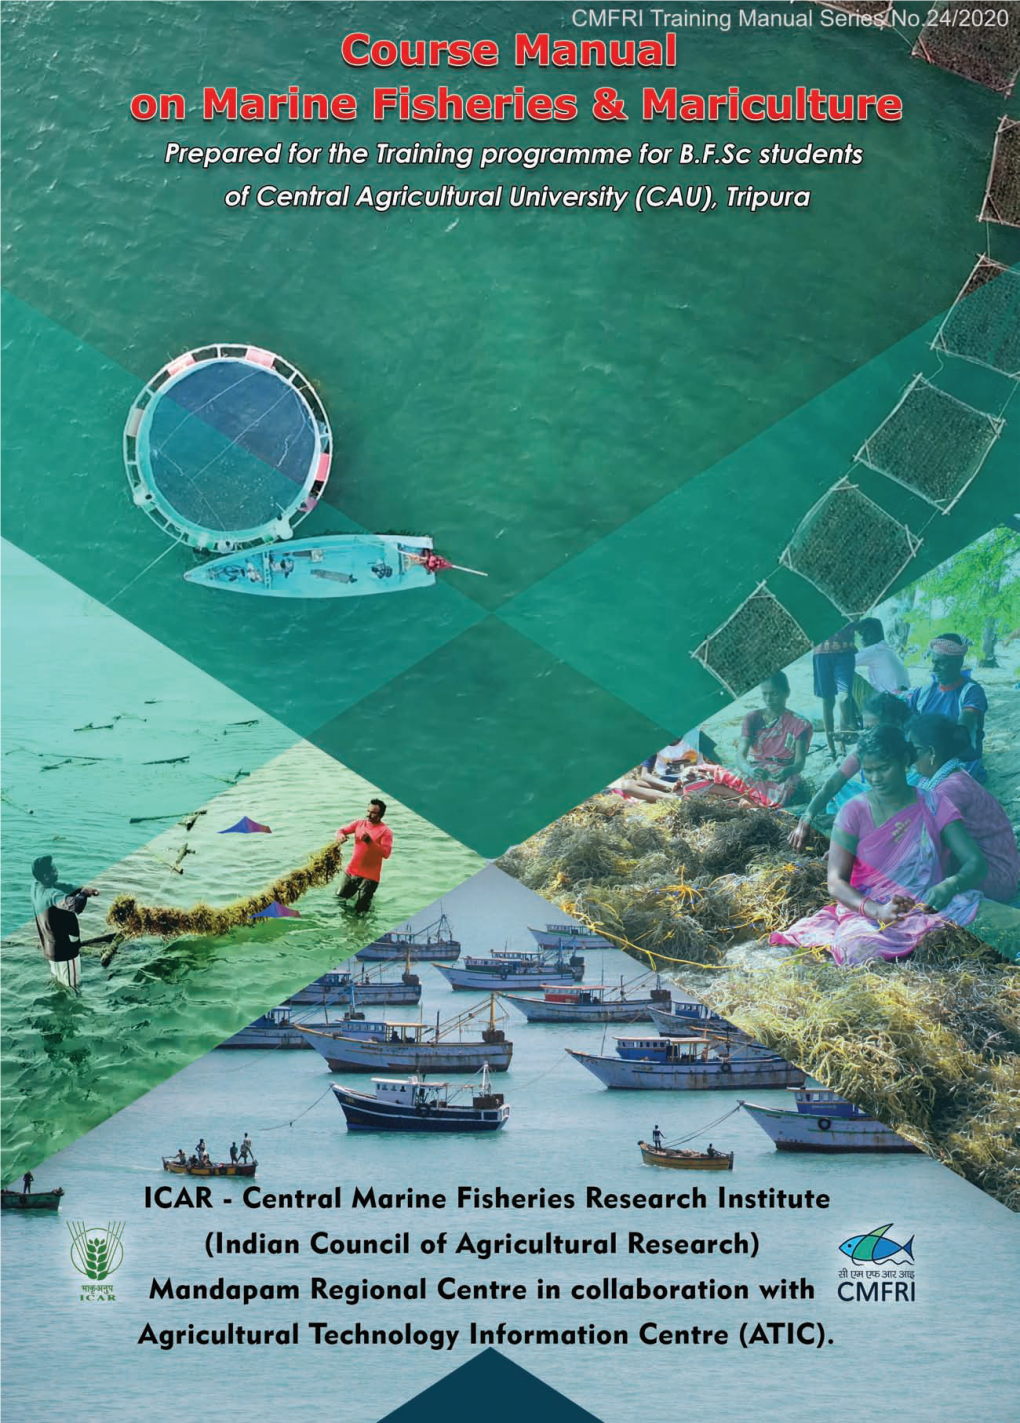 COURSE MANUAL on Marine Fisheries & Mariculture